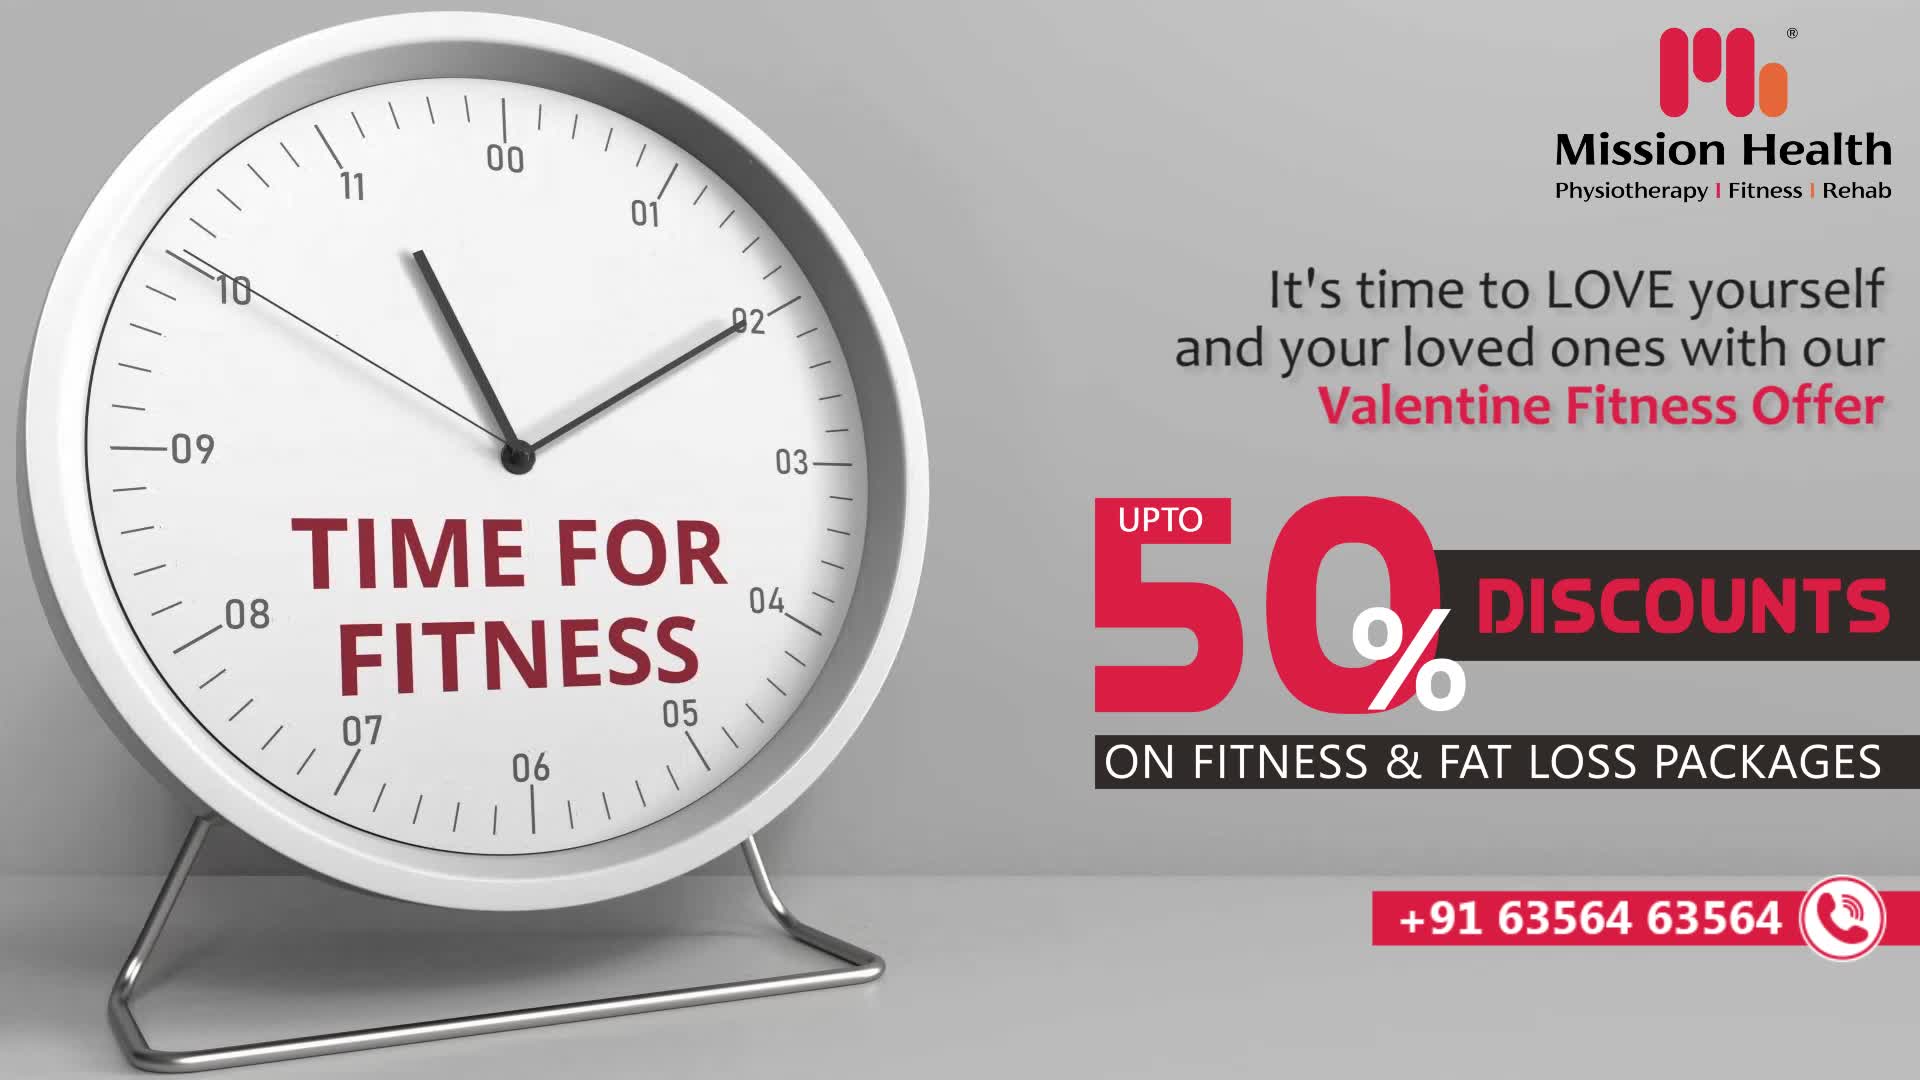 Love is in the AIR

Be FIT, Love Yourself and your loved ones with our Valentine Fitness Offer!

Visit us at your nearest Mission Health Fitness Boutique

Call: +916356463564
Visit: www.missionhealth.co.in

#valentinefitnessoffer #exercise #exercises #fitnessexperts #fitnessexpert #fitnessteam #gymoholic #winterworkouts #fitness #winterfitness #befit #gymoffers #fitnessoffers #goslim #MissionHealth #MissionHealthIndia #MovementIsLife